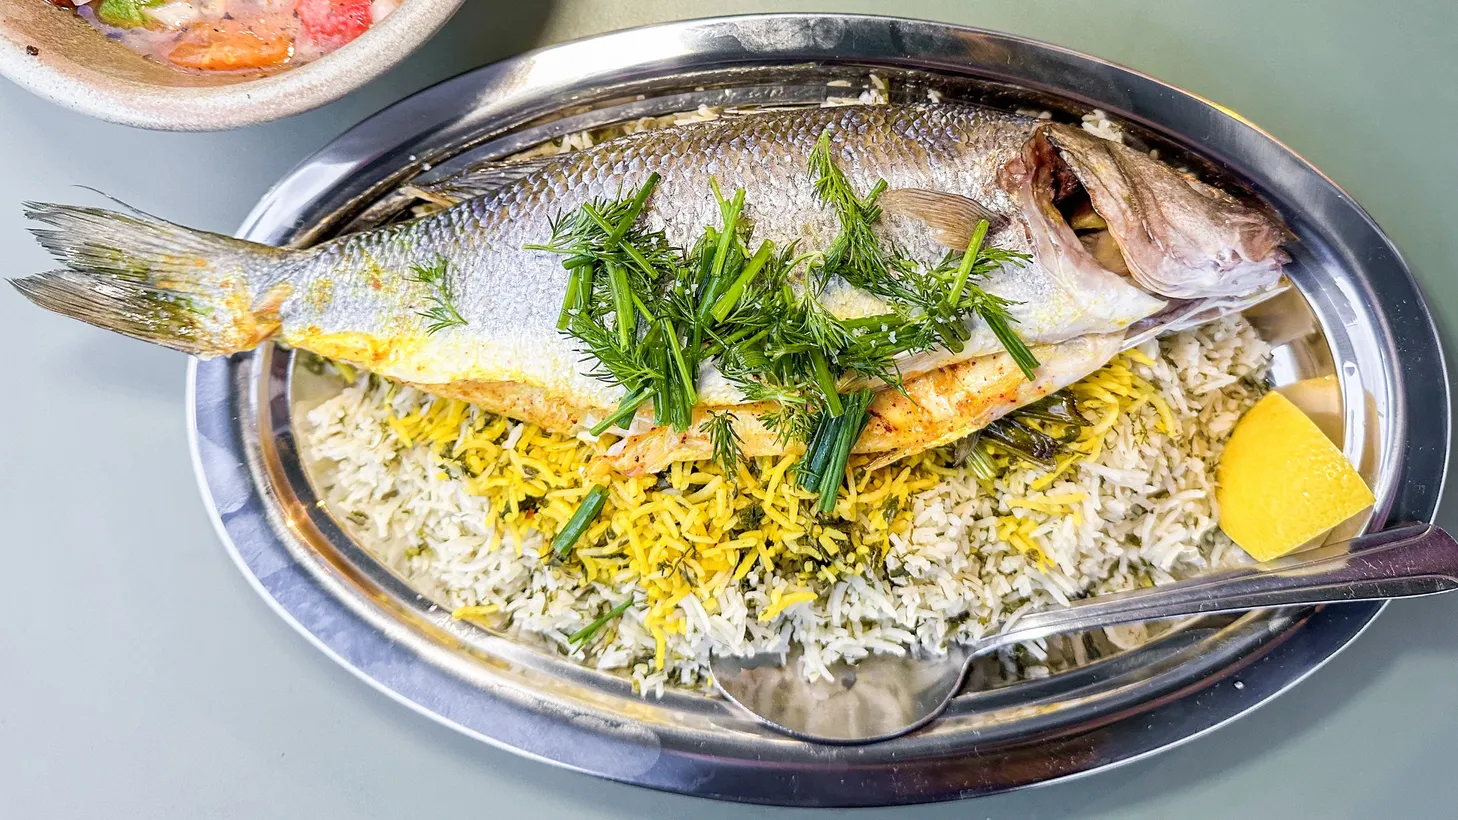 A whole roasted branzino stuffed with herbs and served on top of herbed rice was the centerpiece of Azizam's Nowruz menu.